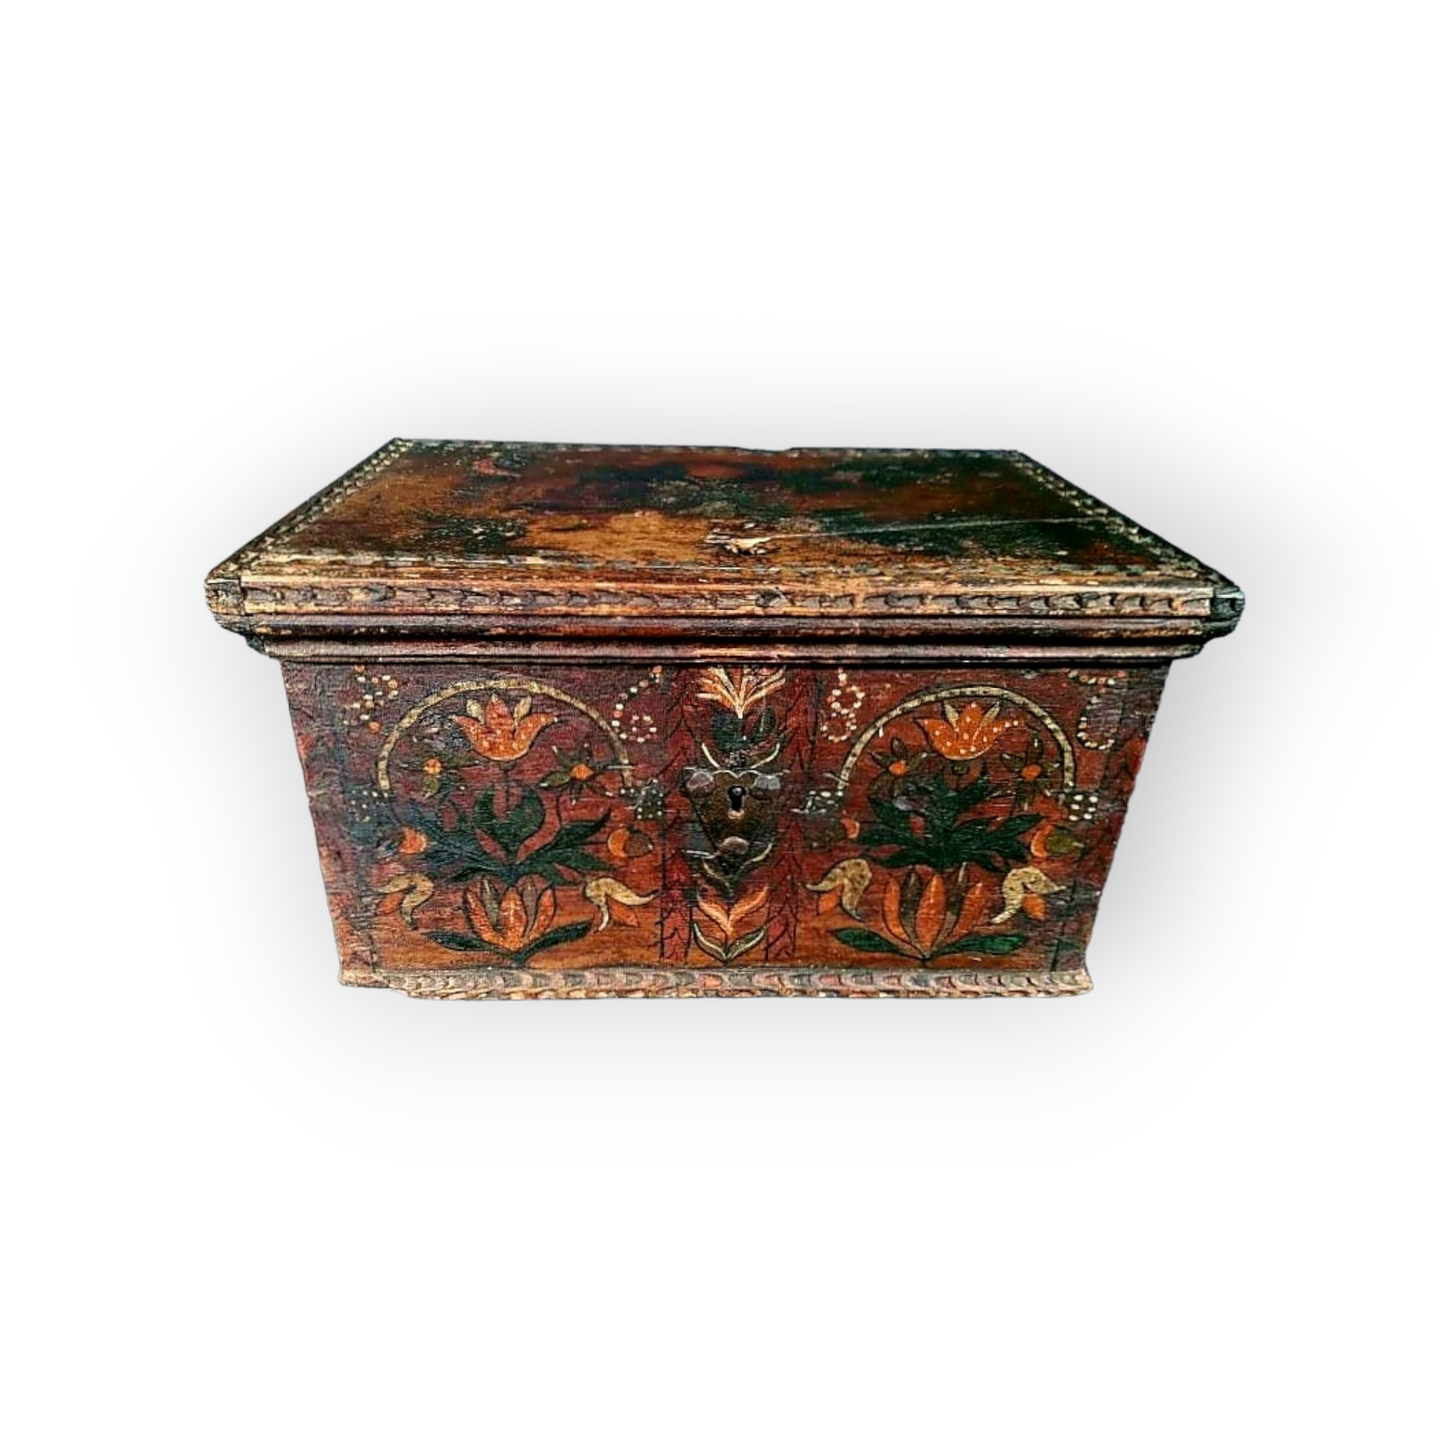 Late 17th Century Swiss Antique Folk-Art Decorated Table Top Box Dated "1687"